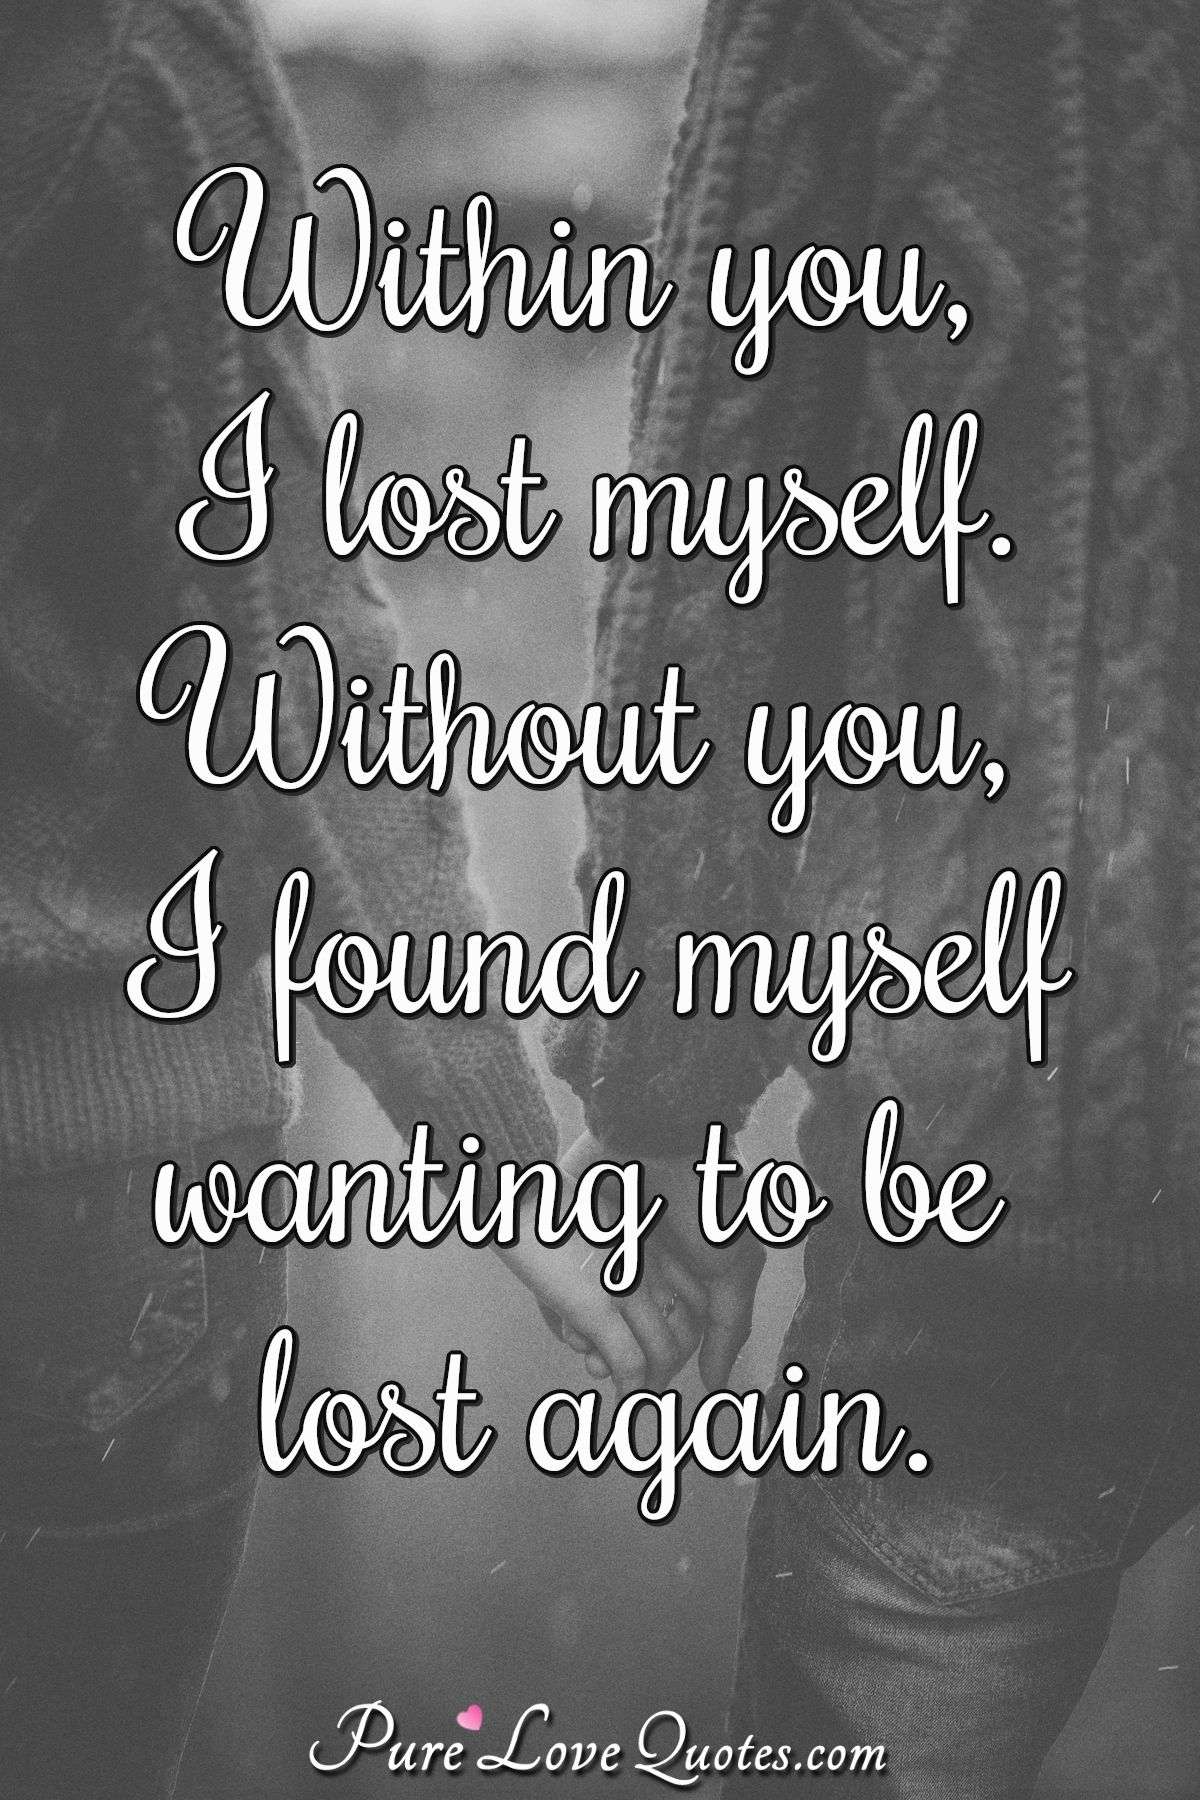 Within you, I lost myself. Without you, I found myself wanting to be lost again. - Anonymous